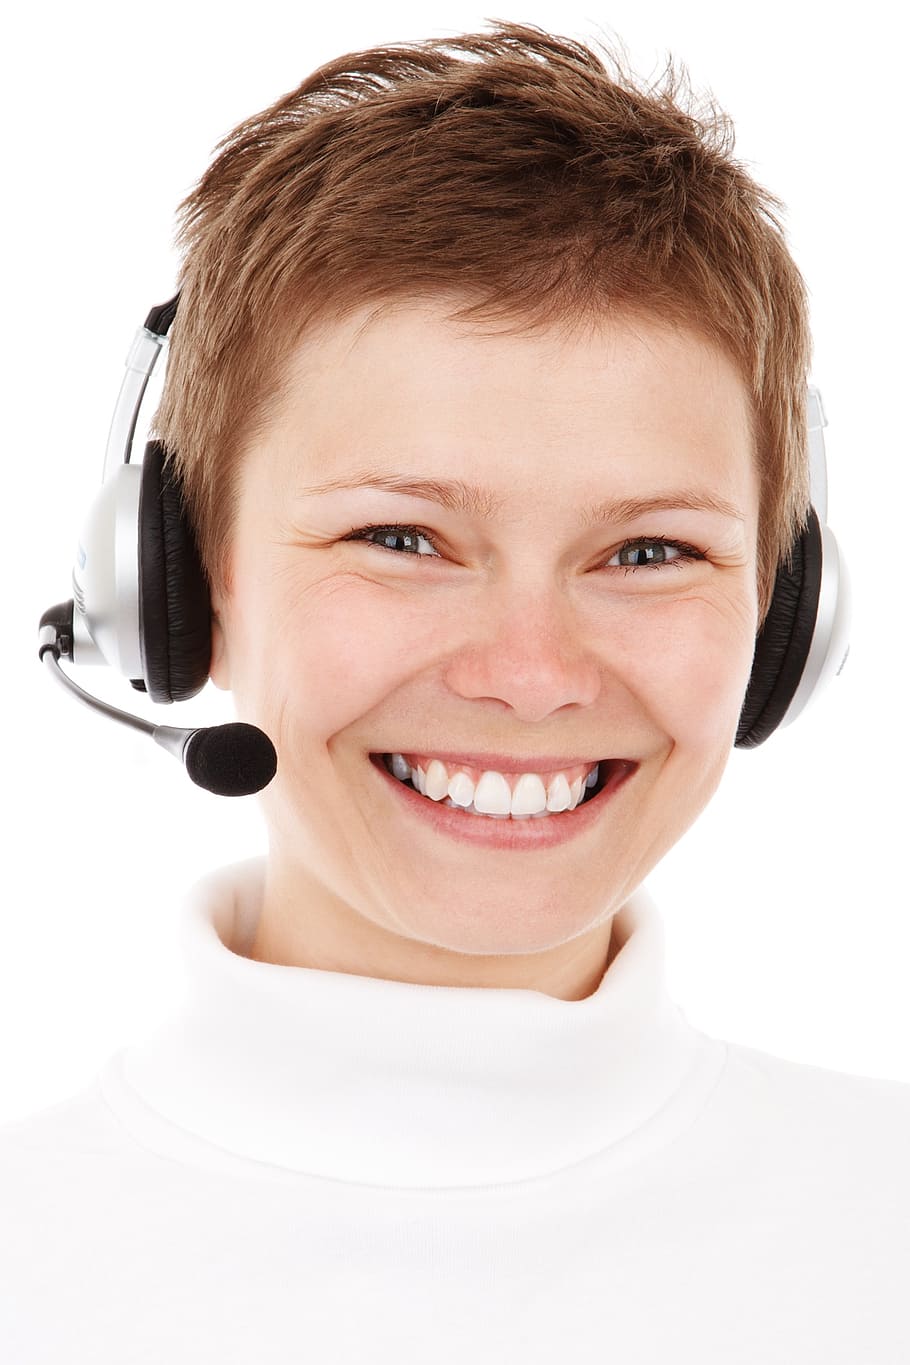 person wearing white top smiling for photo, agent, business, call